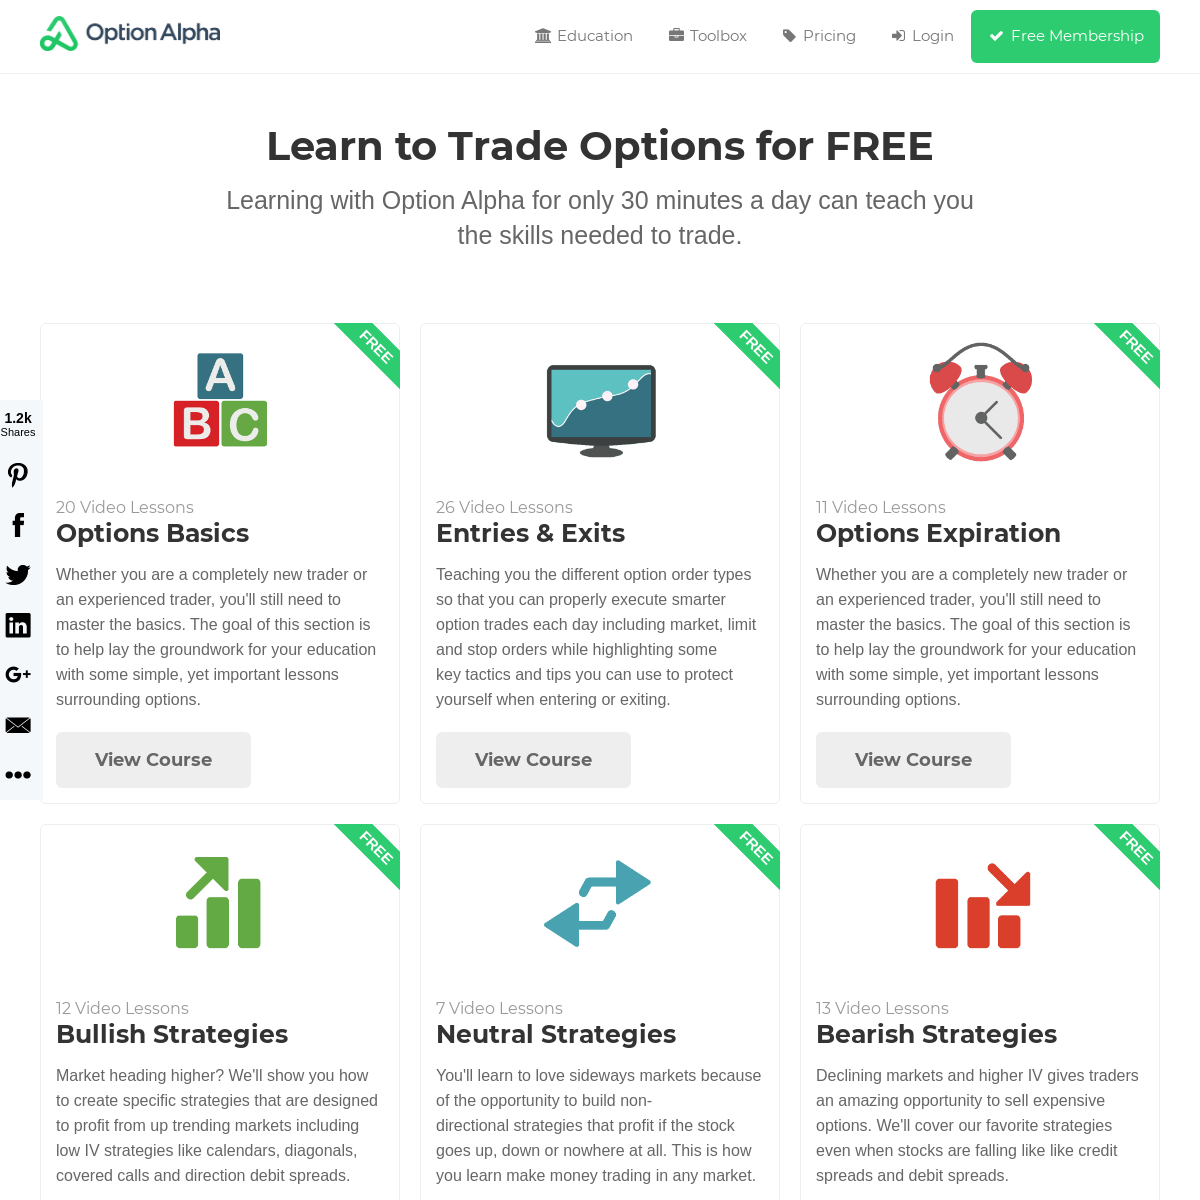 Top 10 Free Options Trading Courses - #1 Options Trading Education